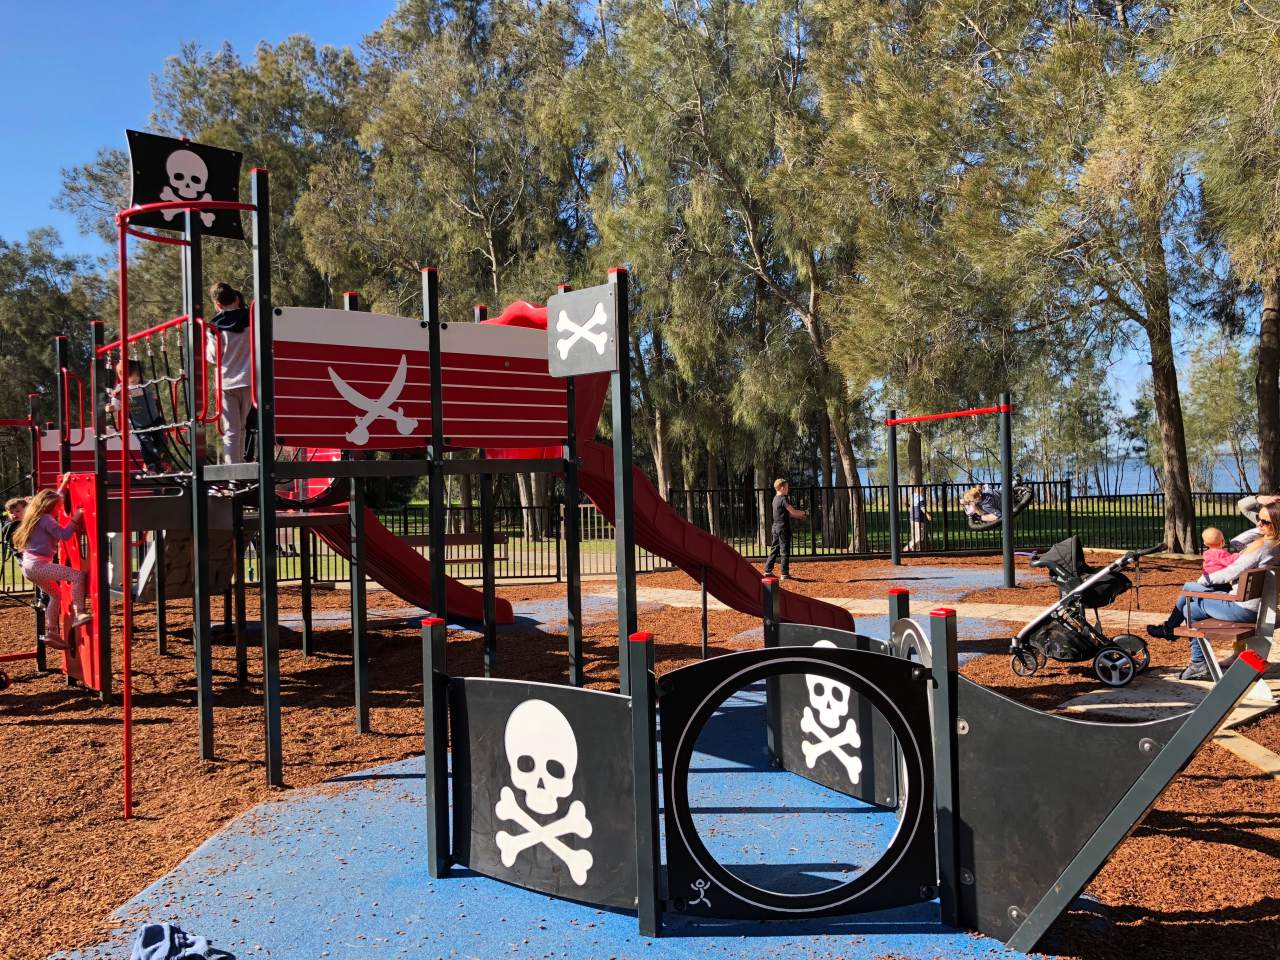 This Very Special ‘Pirate Park’ in Chittaway Bay was Built in Memory of Local Toddler, Jimmy Jurd